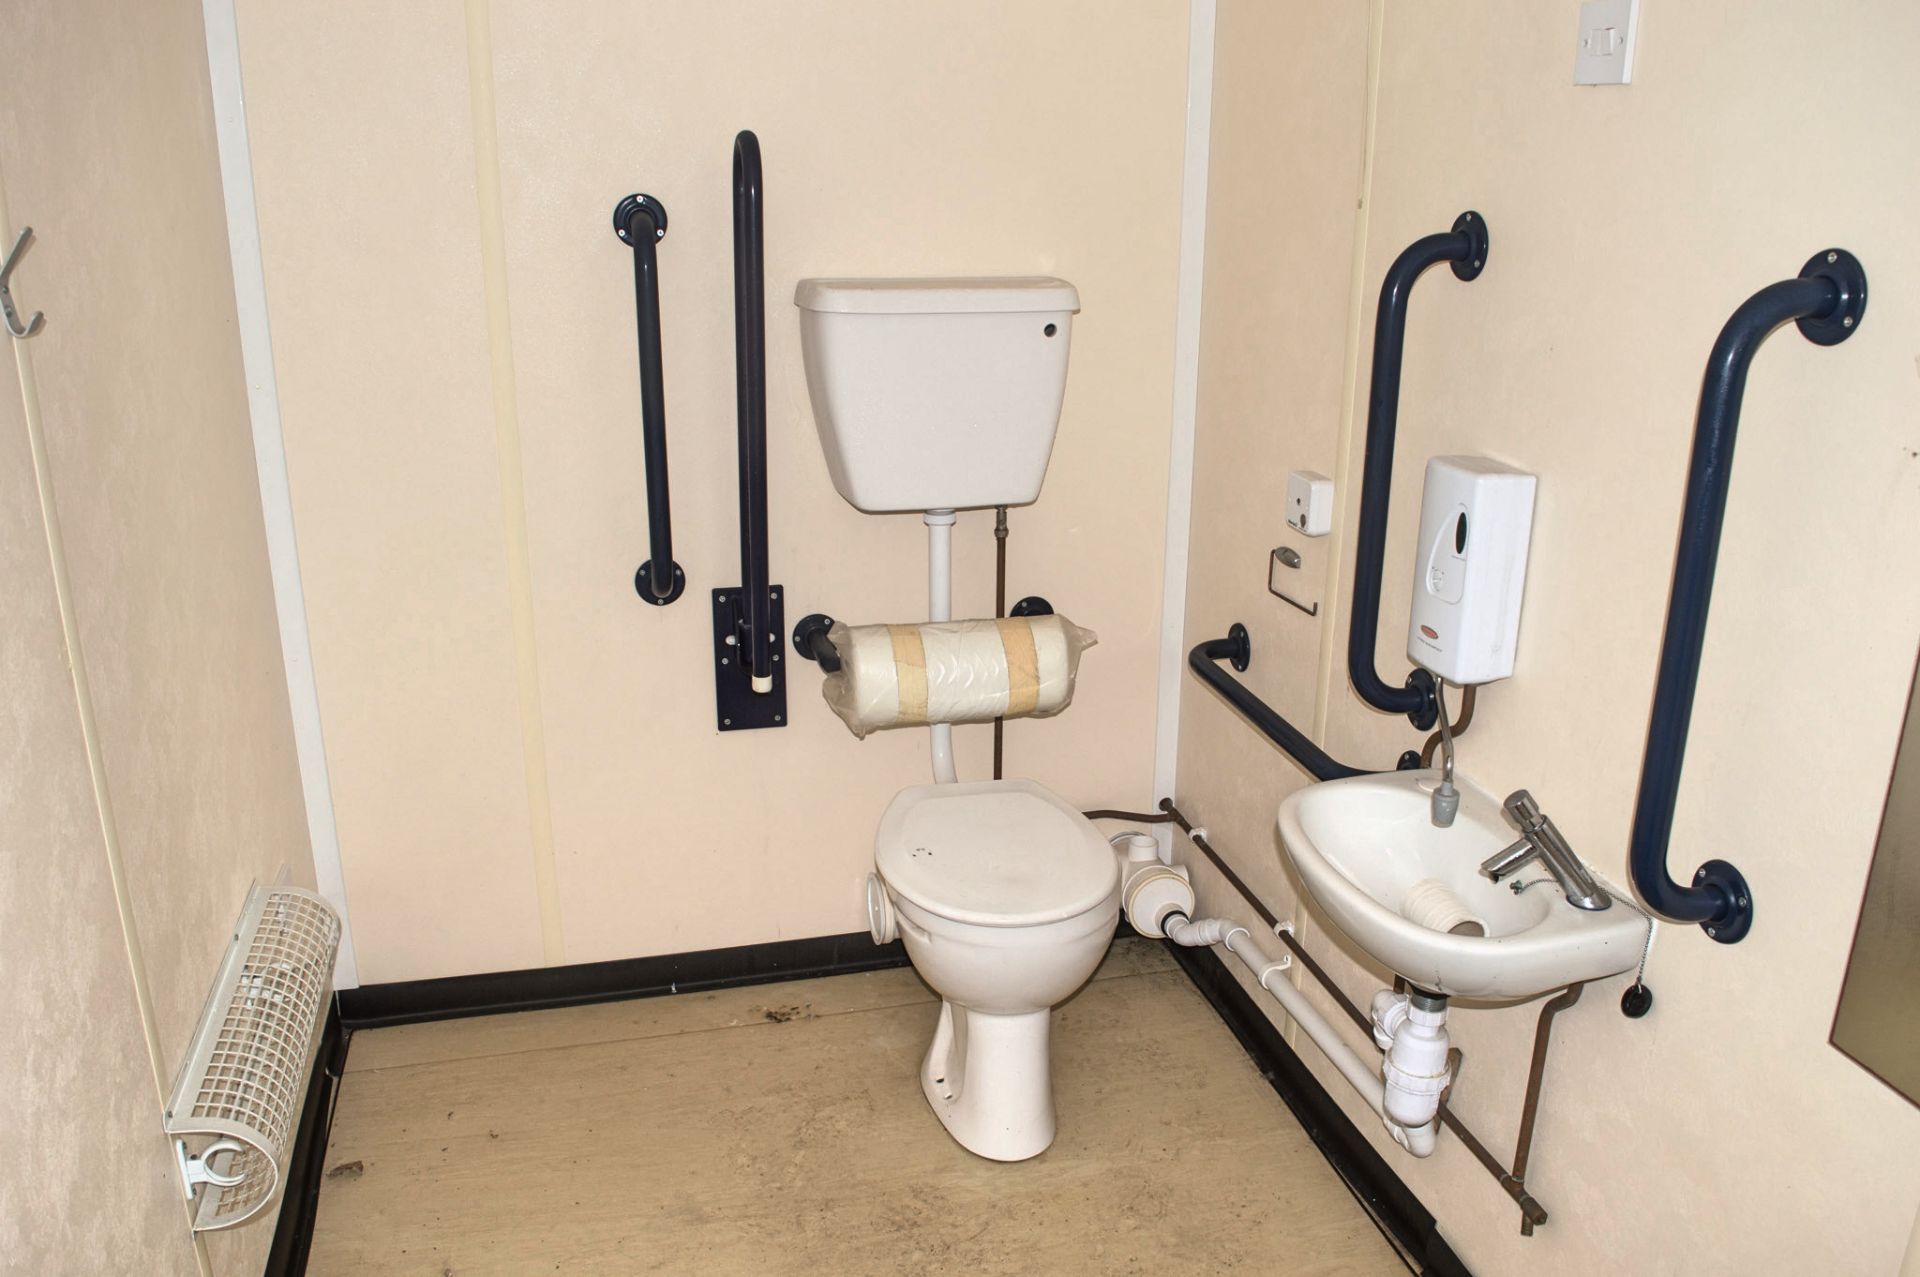 32 ft x 10 ft steel toilet site unit Comprising of: Gents toilet with; 4 - toilets, 4 - urinals & - Image 16 of 16